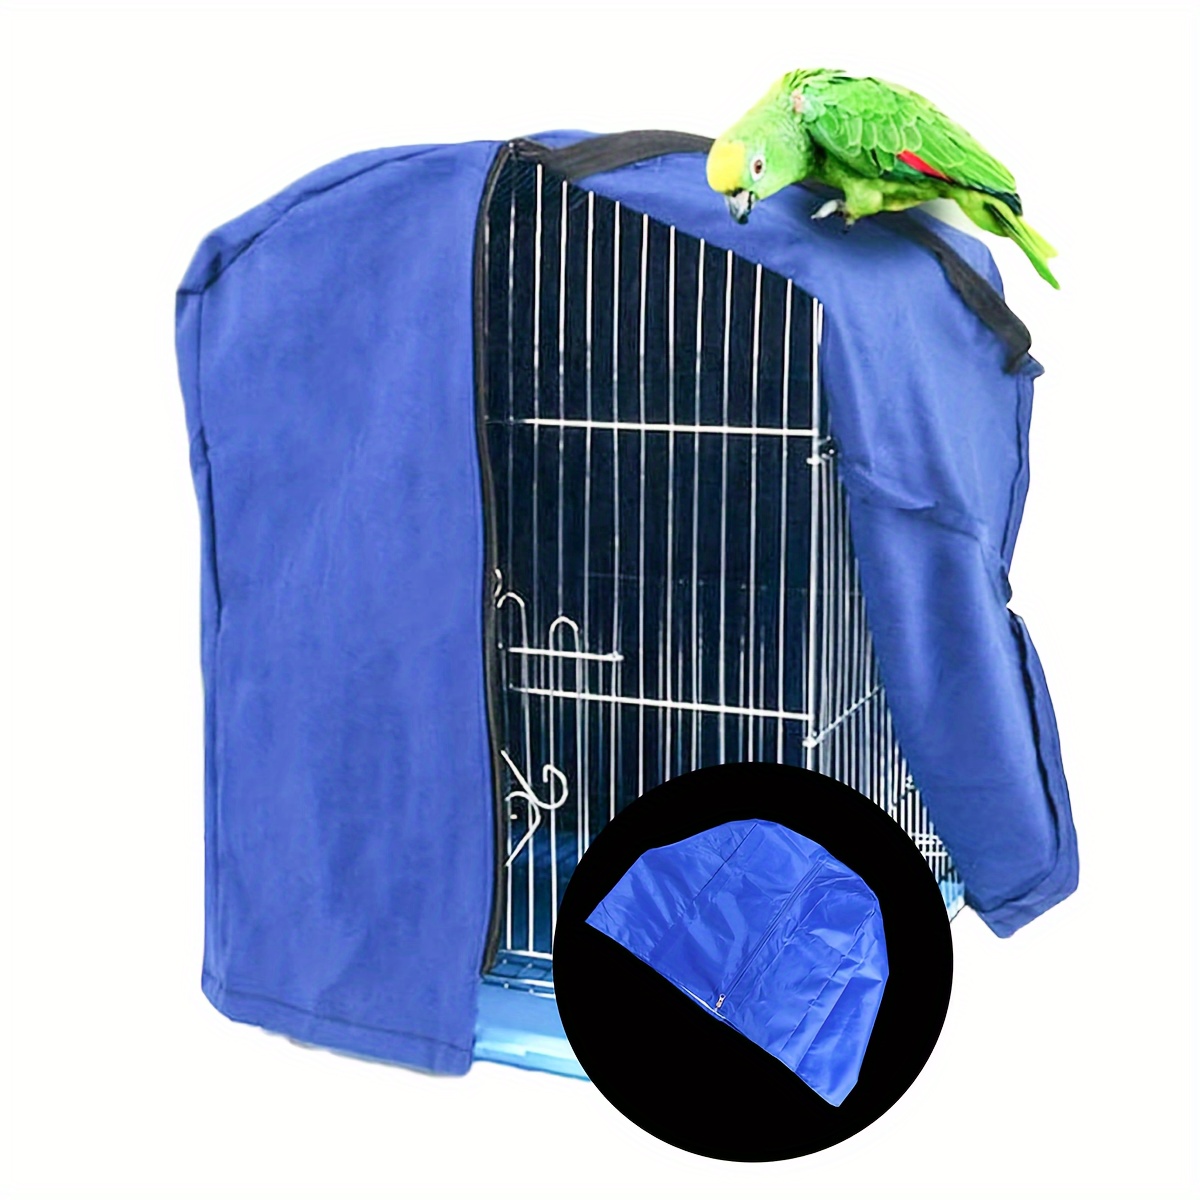 

Bird Cage Cover, Durable Protector For Square Cages, Easy Zip-up Design, Pet Accessory For Large Sized Aviaries, Dust-proof Material With Secure Fit